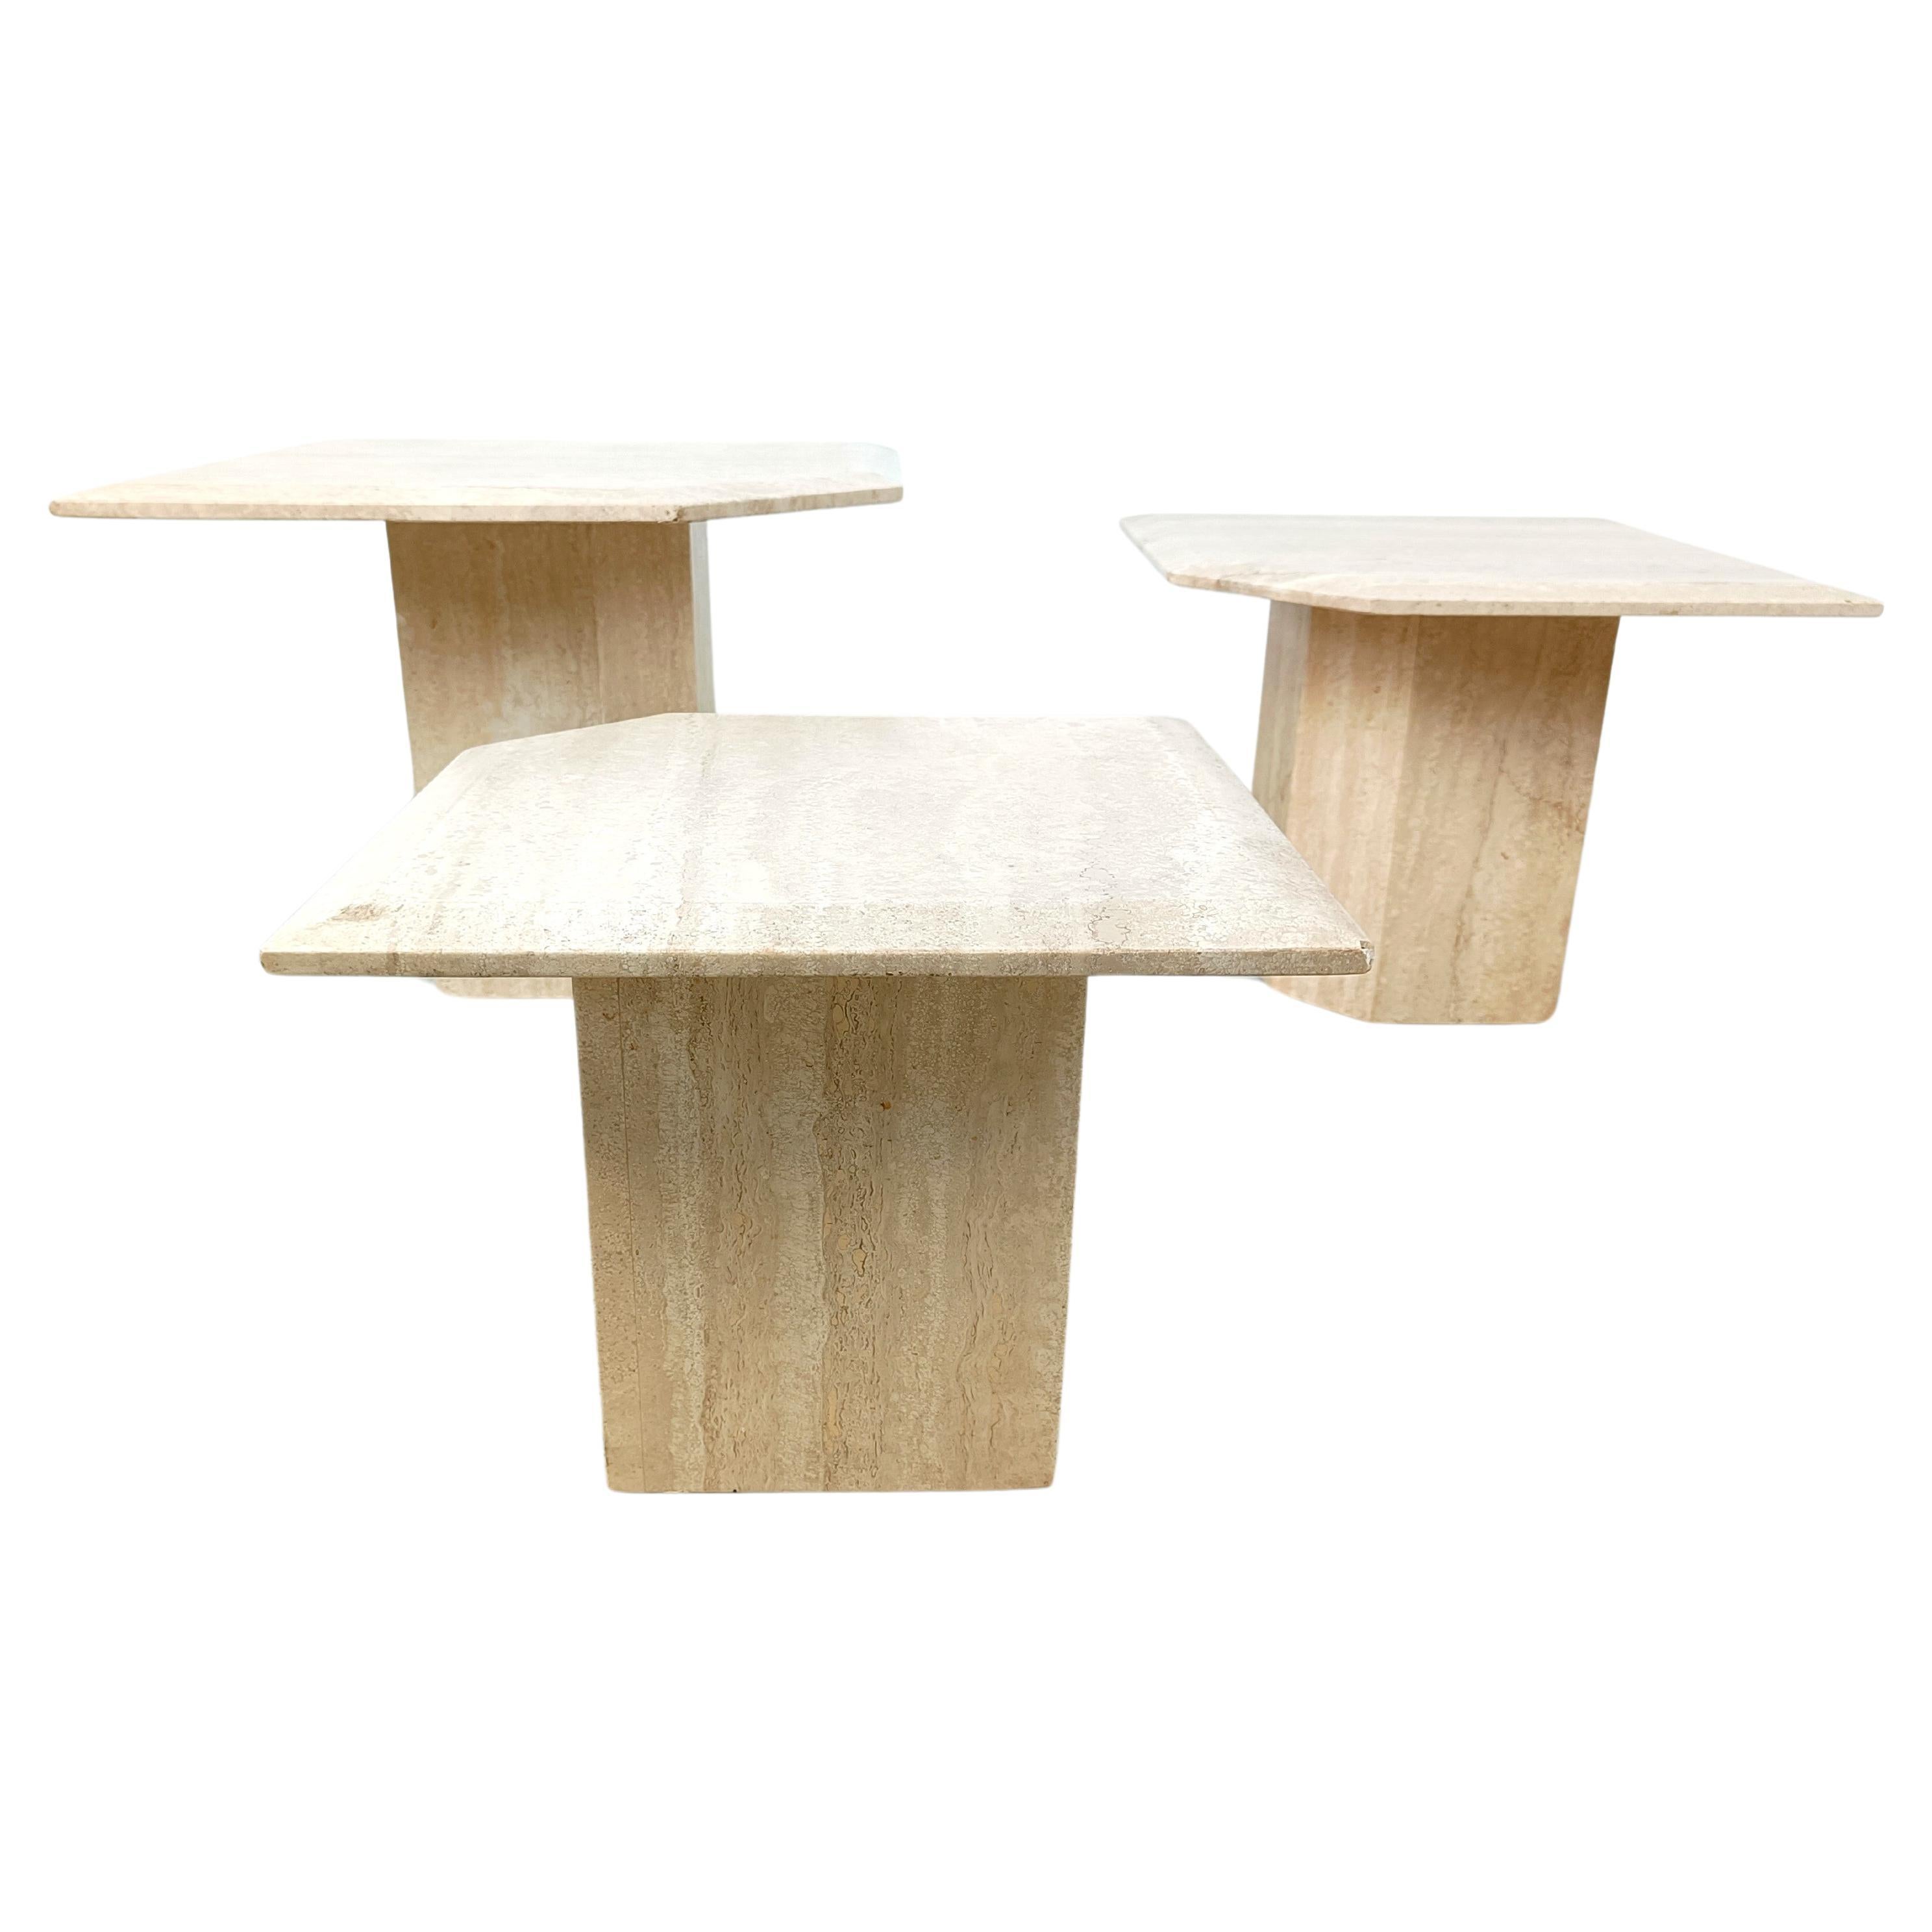 Vintage travertine nesting tables or side tables, 1970s